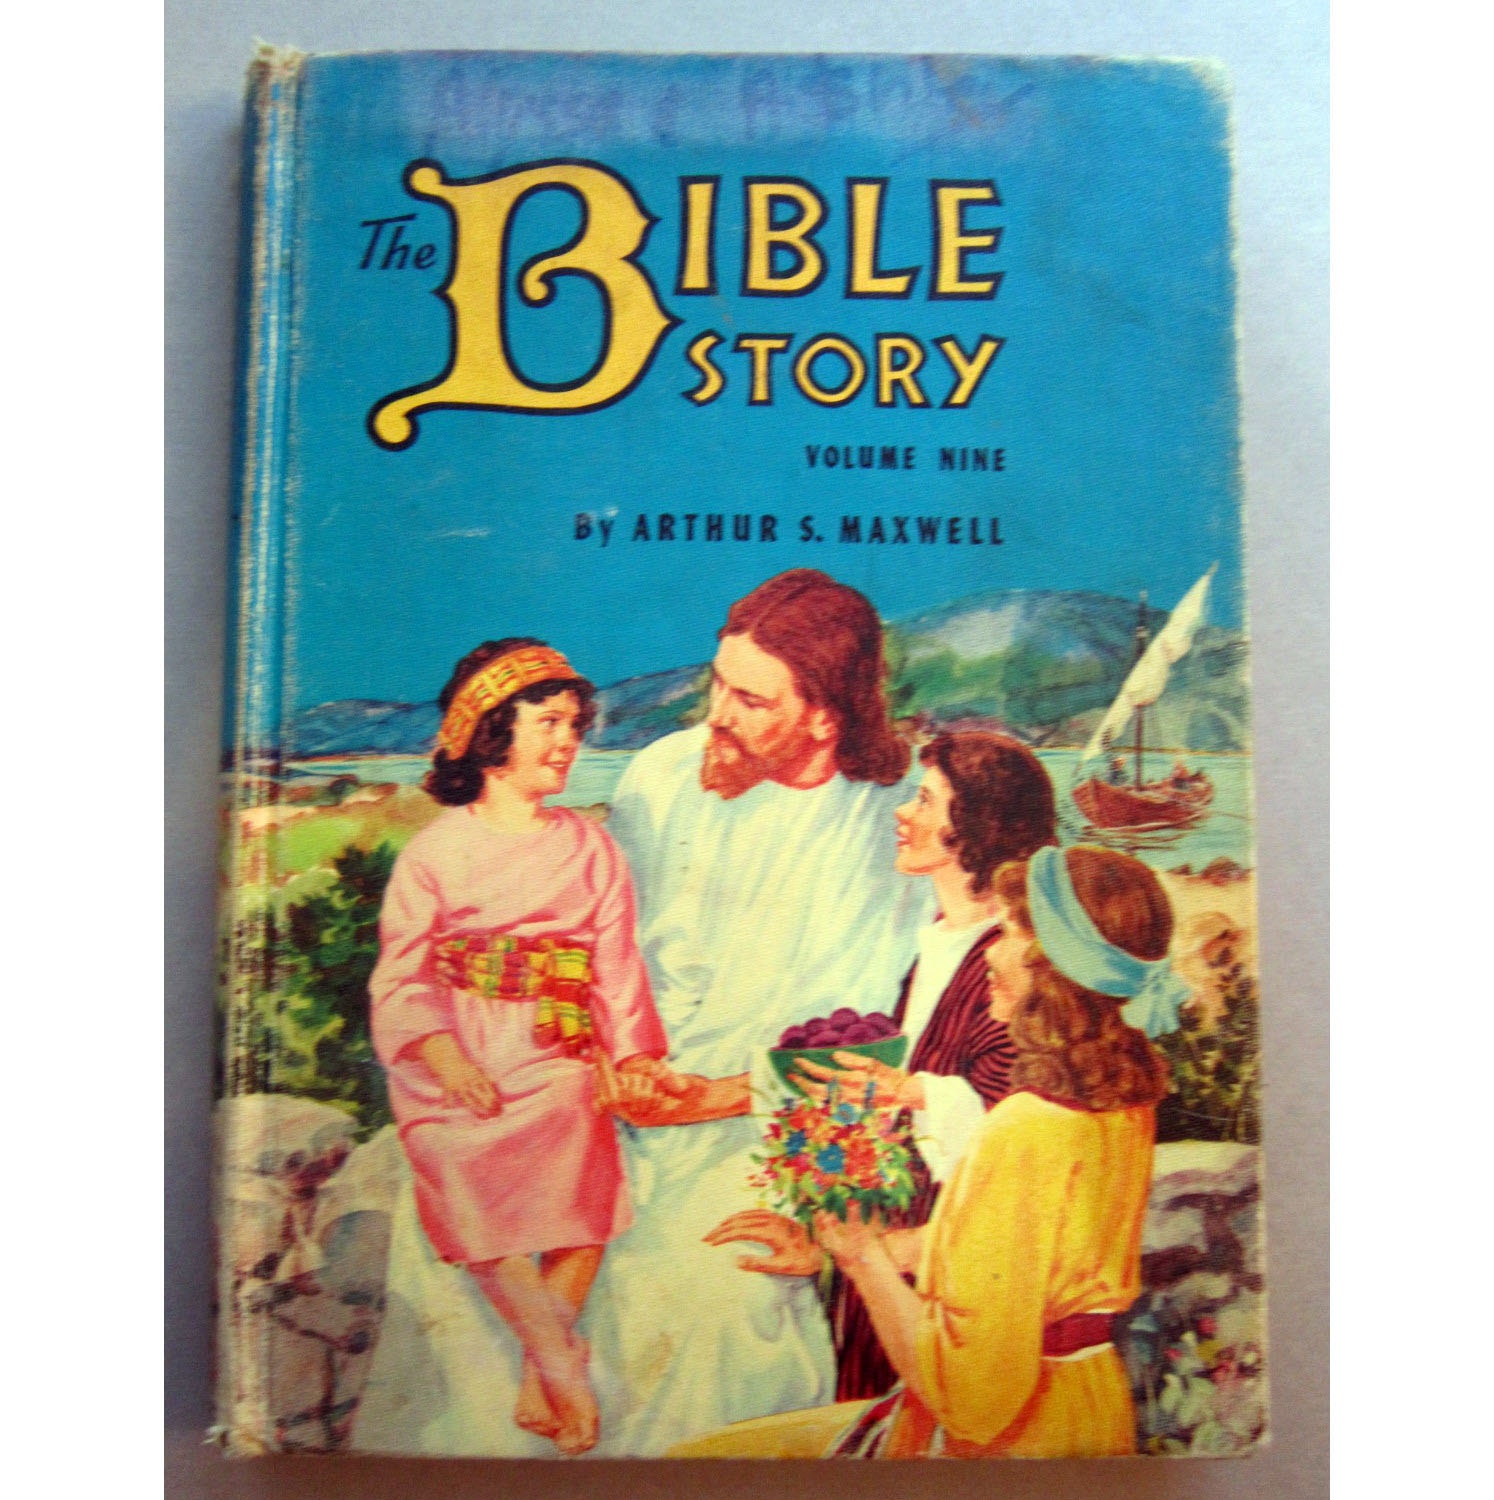 SALE antique book The BIBLE Story children's book